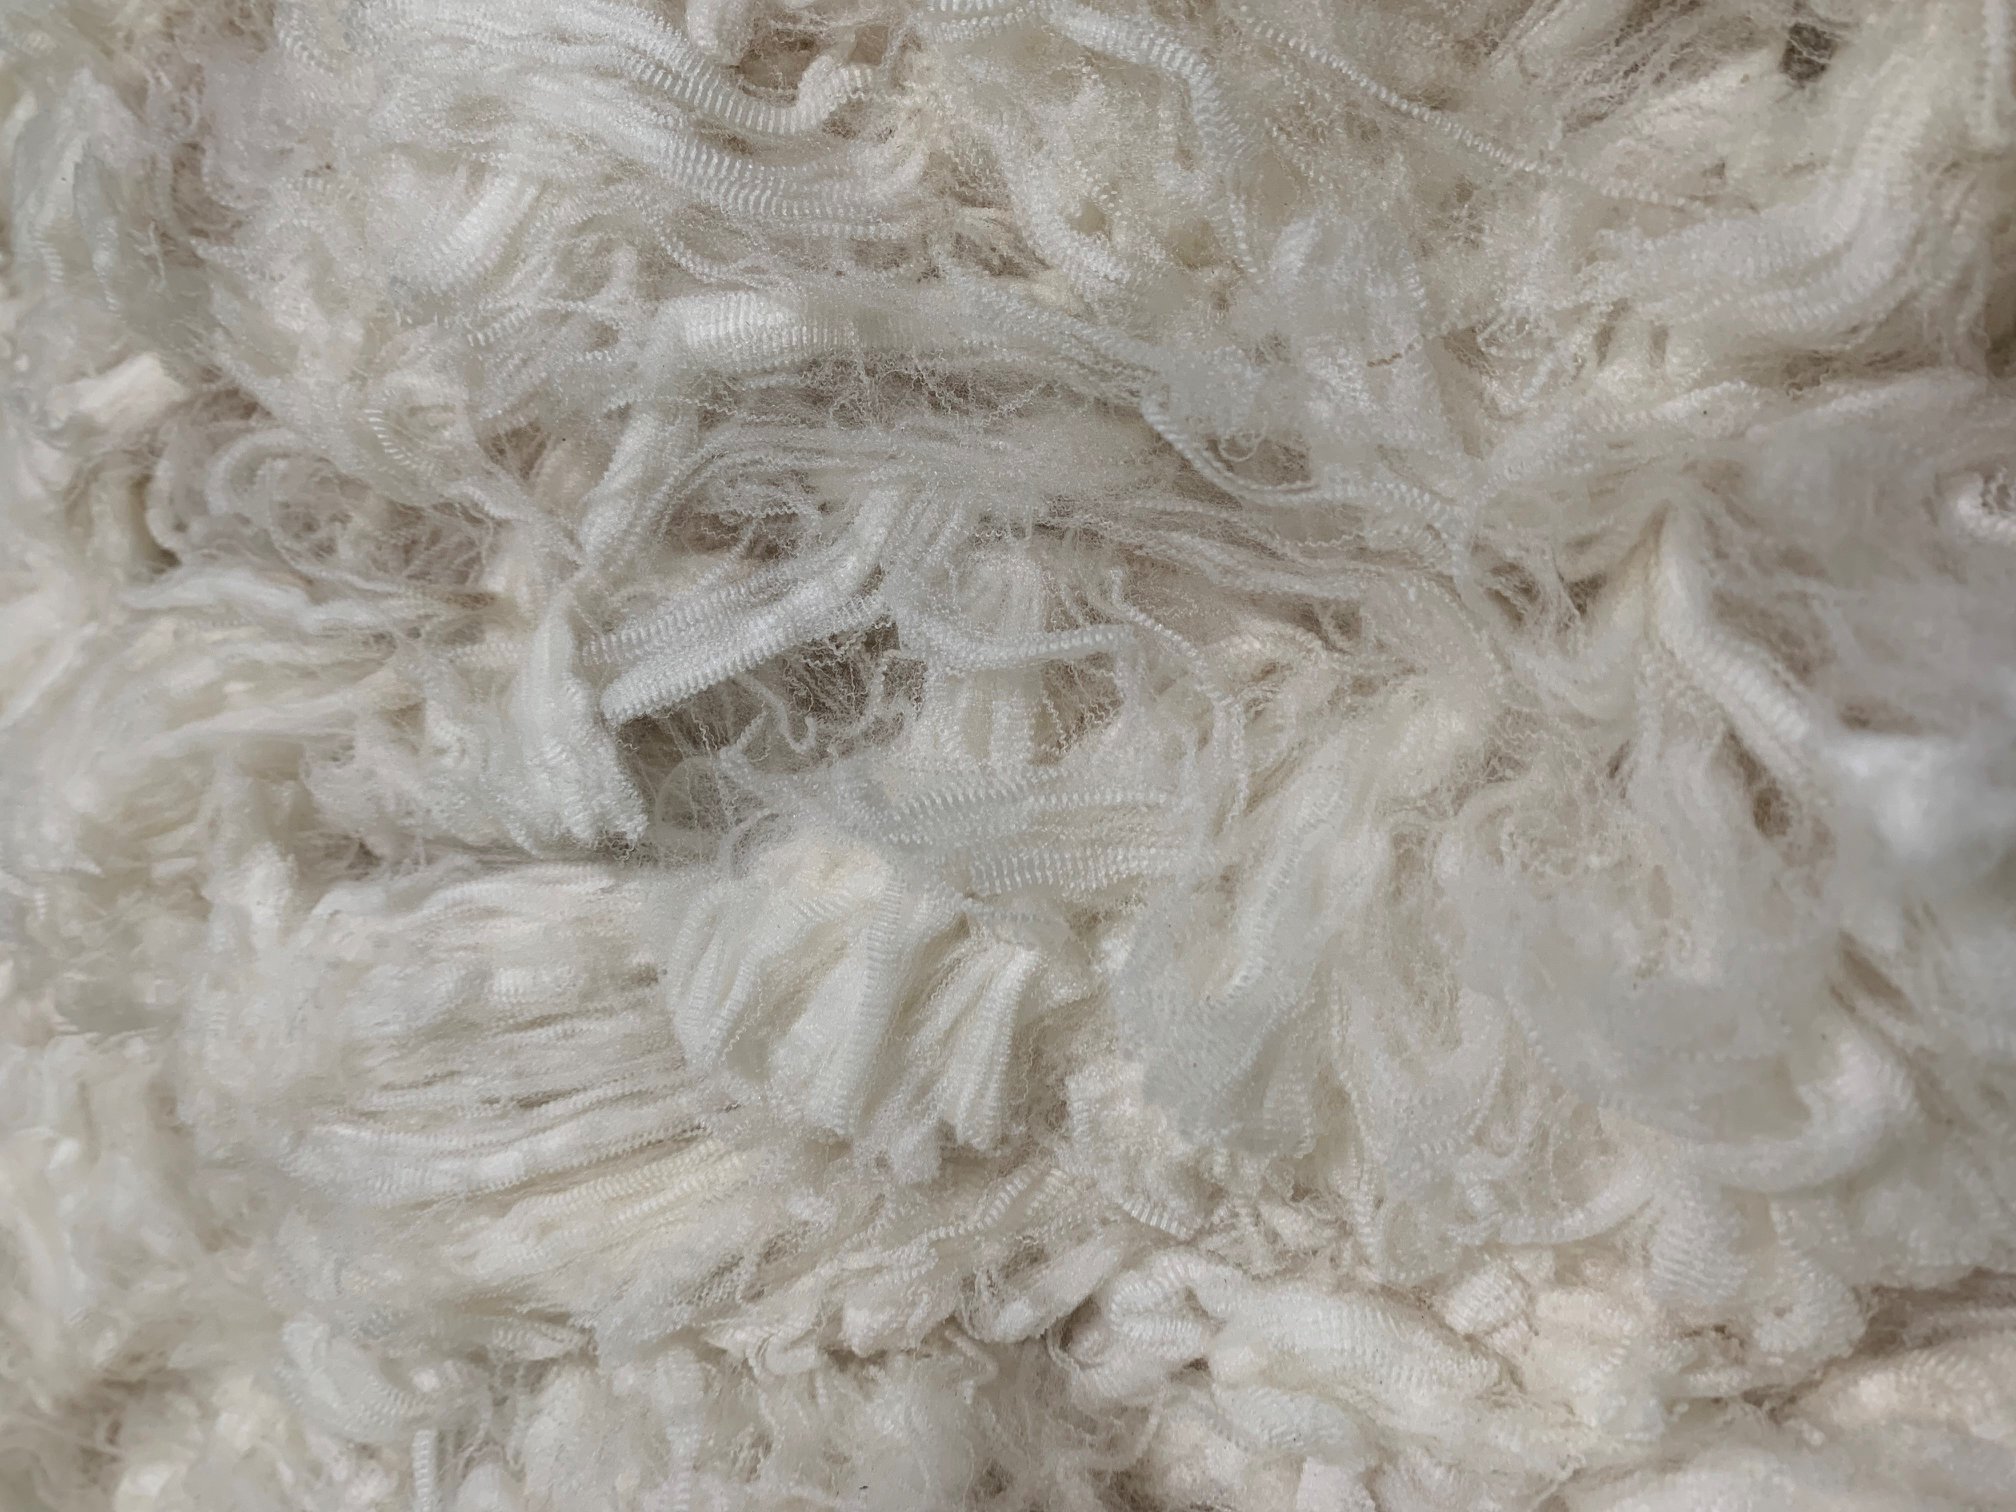 Merino wool prices to soften, but no sharp drop expected - Sheep